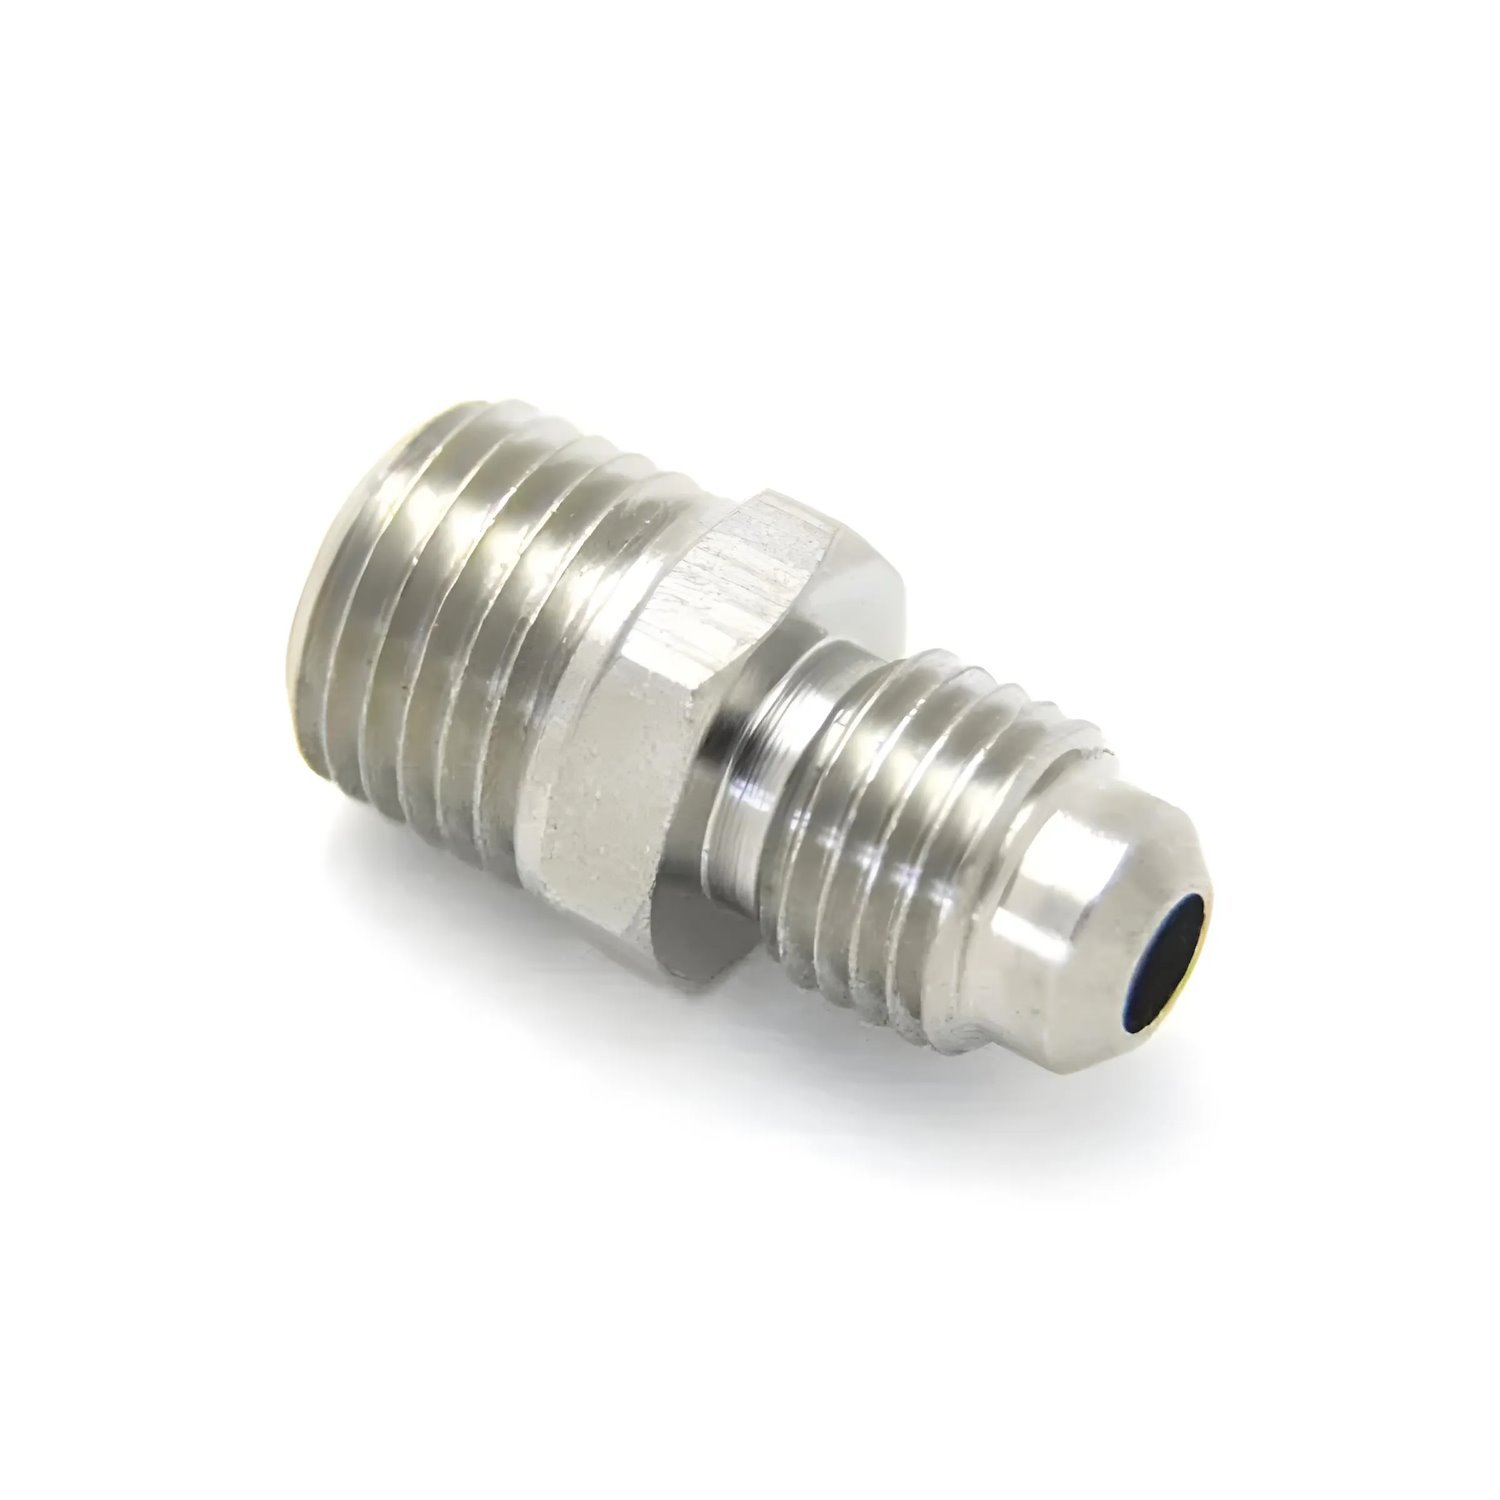 00-01155-B 1/4 in. NPT x 4AN Straight Fitting, Male/Male